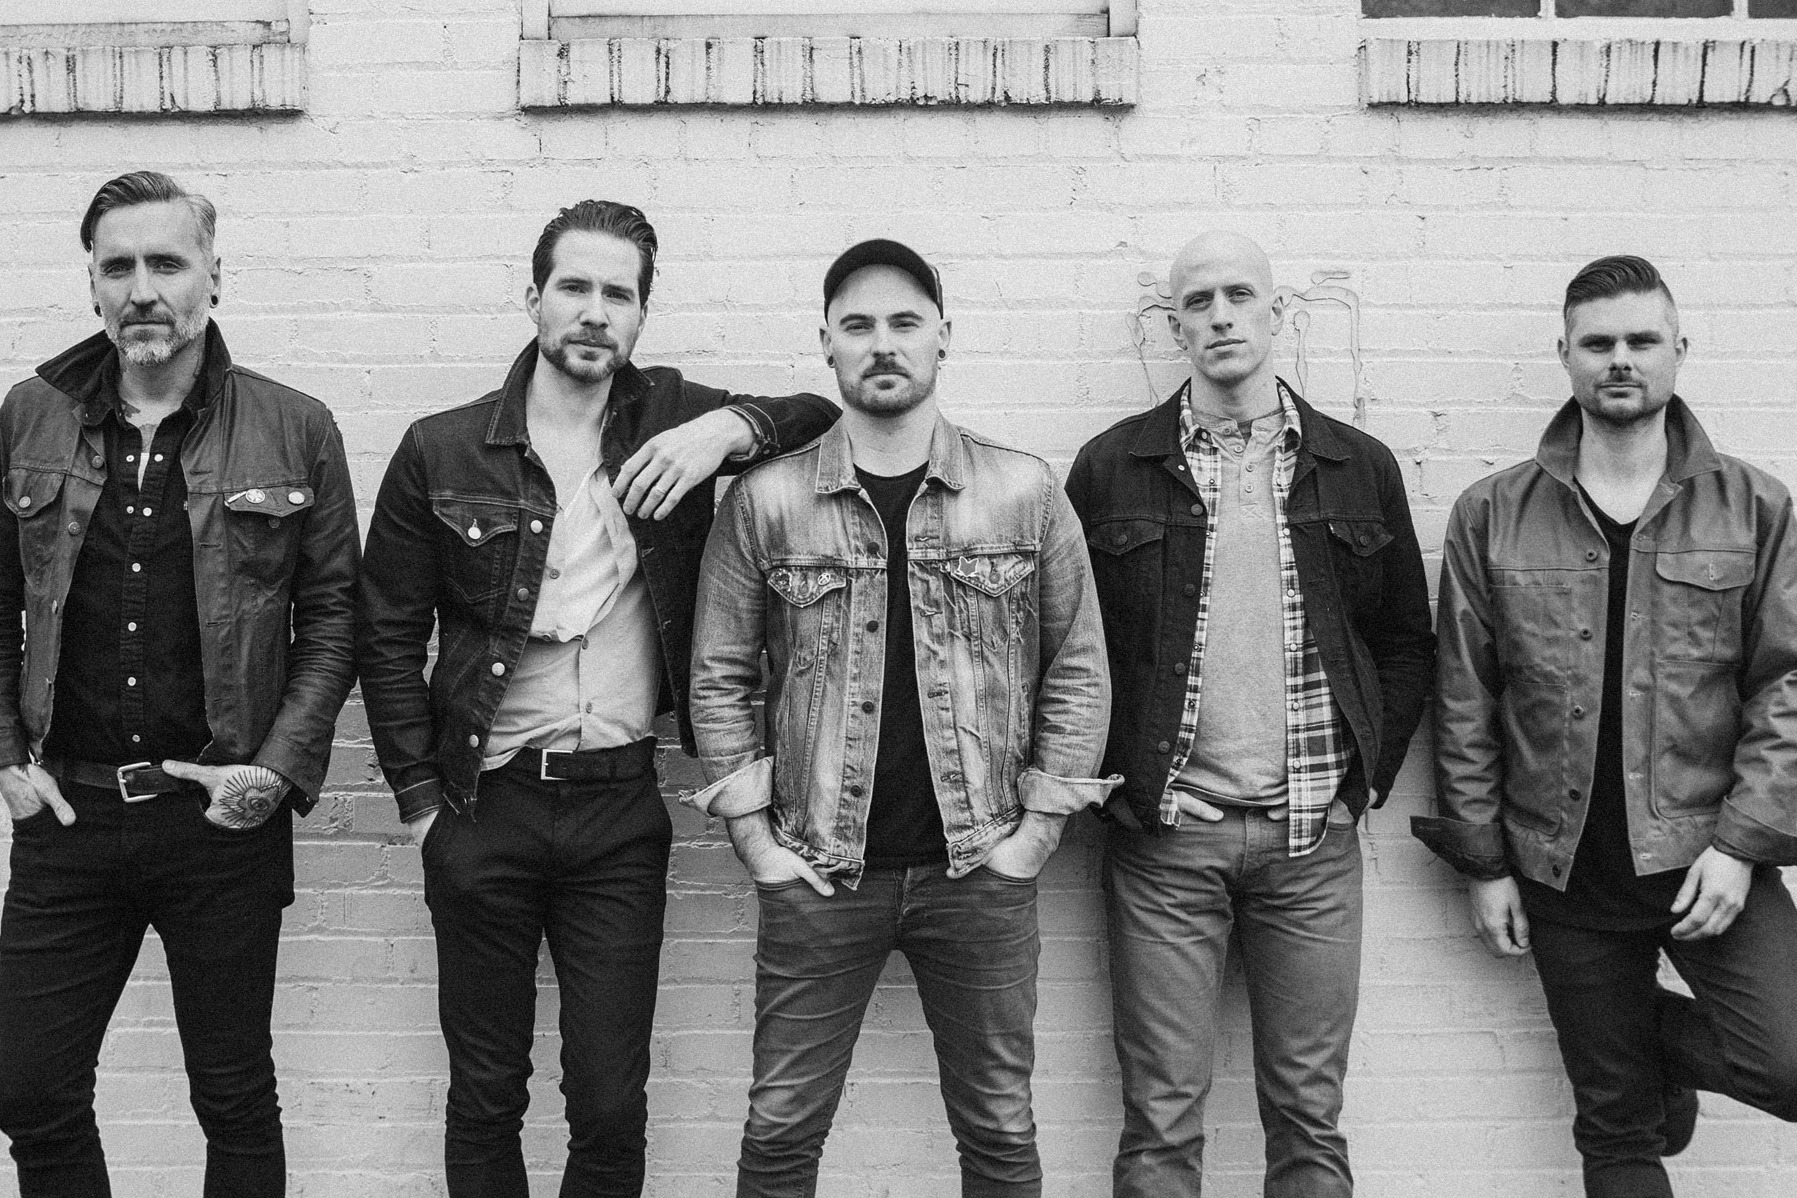 Acceptance Reunites, Discusses Inspirations Of U2-Meets-The Killers Tune, “Midnight”